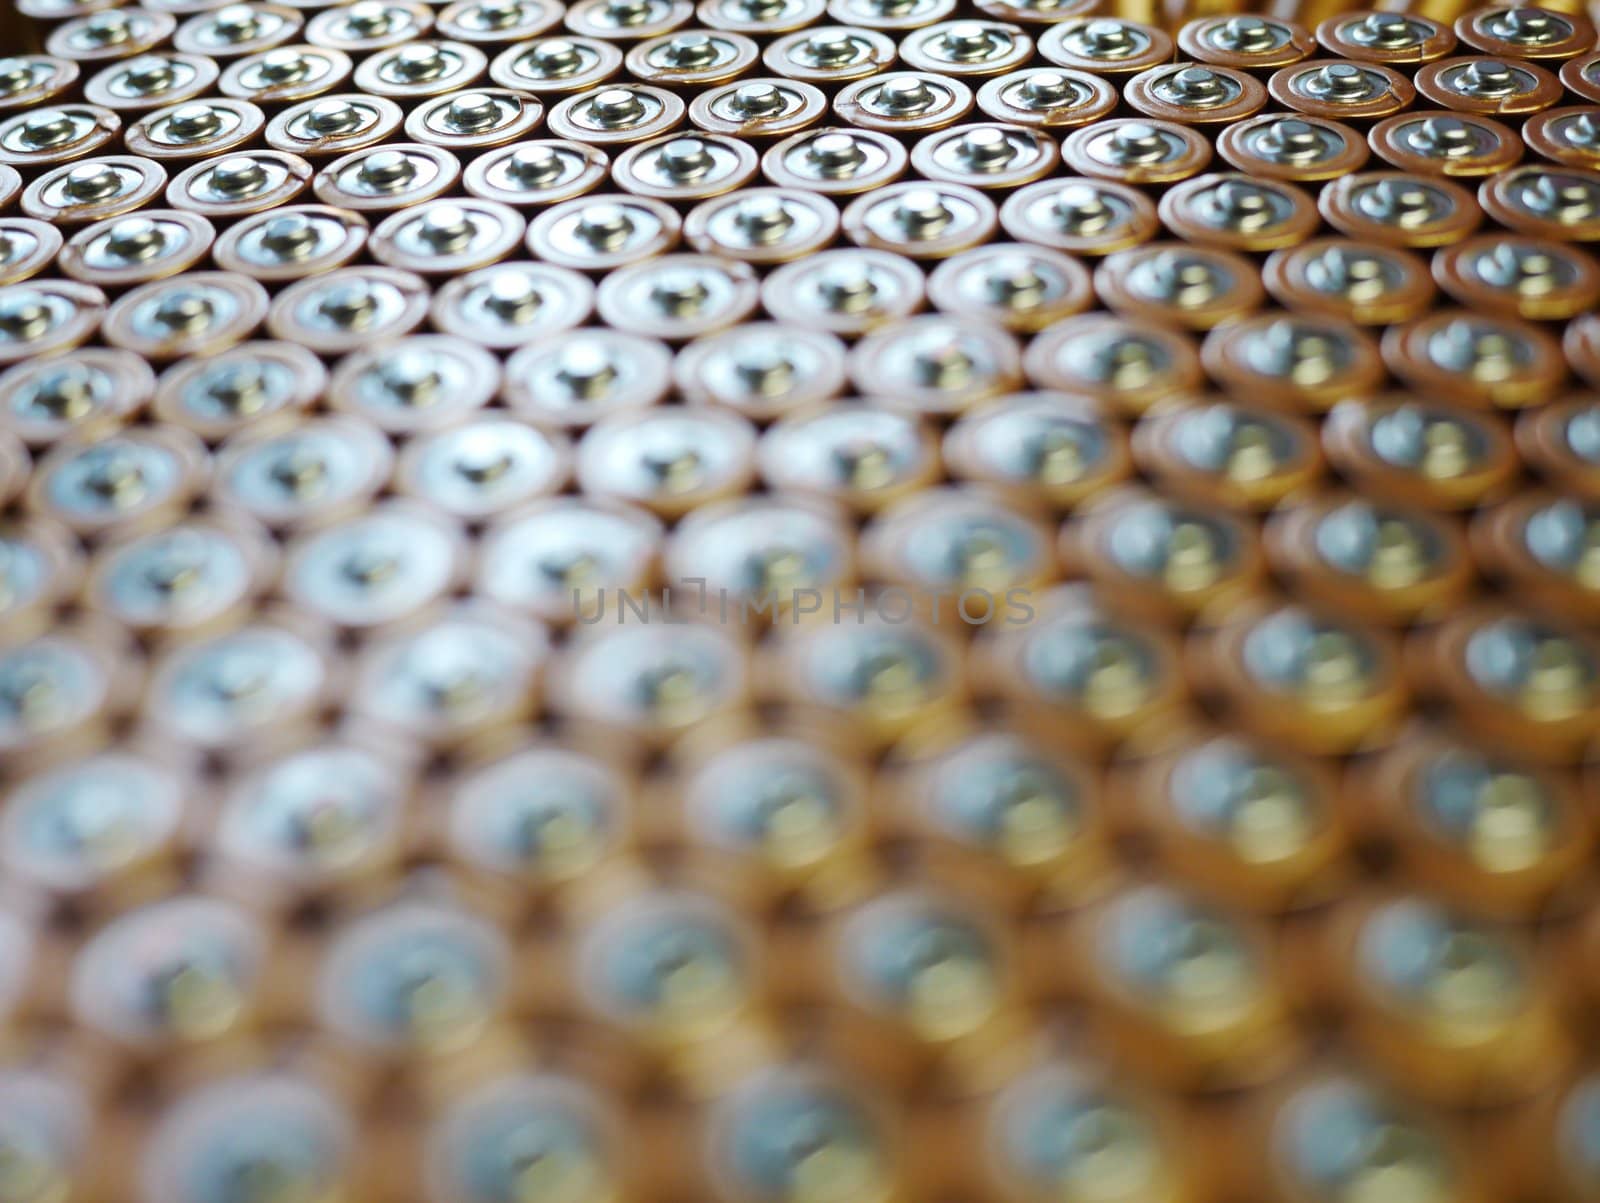 Several AA batteries in perspective closeup view